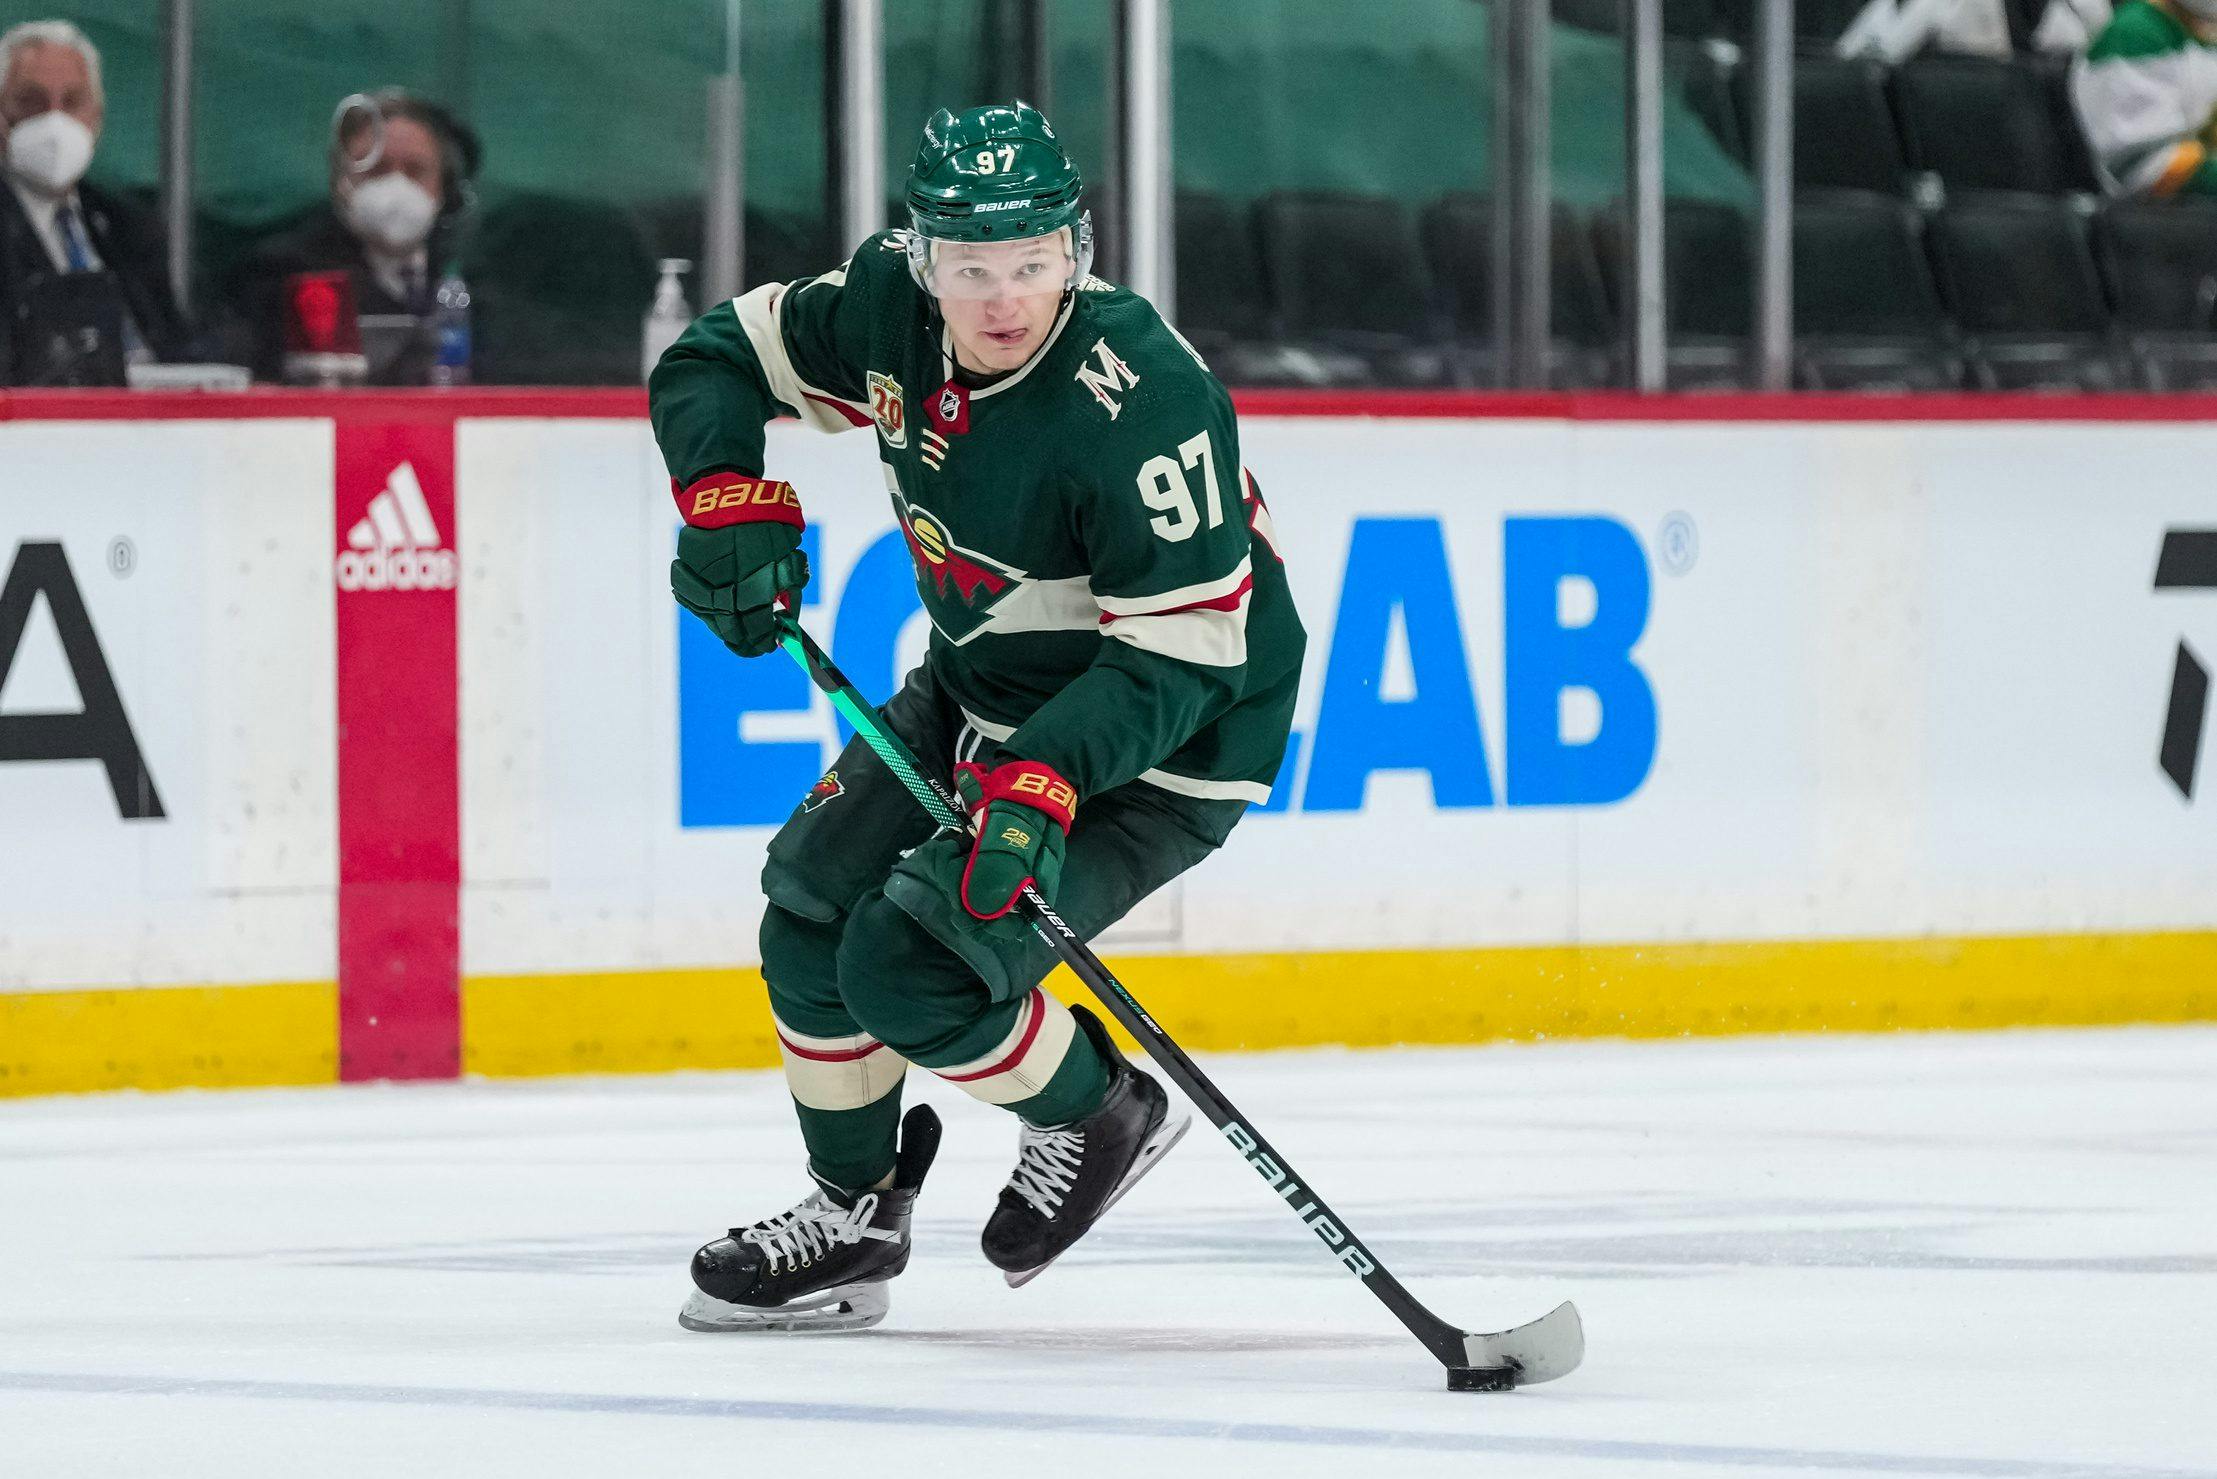 Early Season Look In: Kaprizov Brings Excitement The Wild’s Never Had